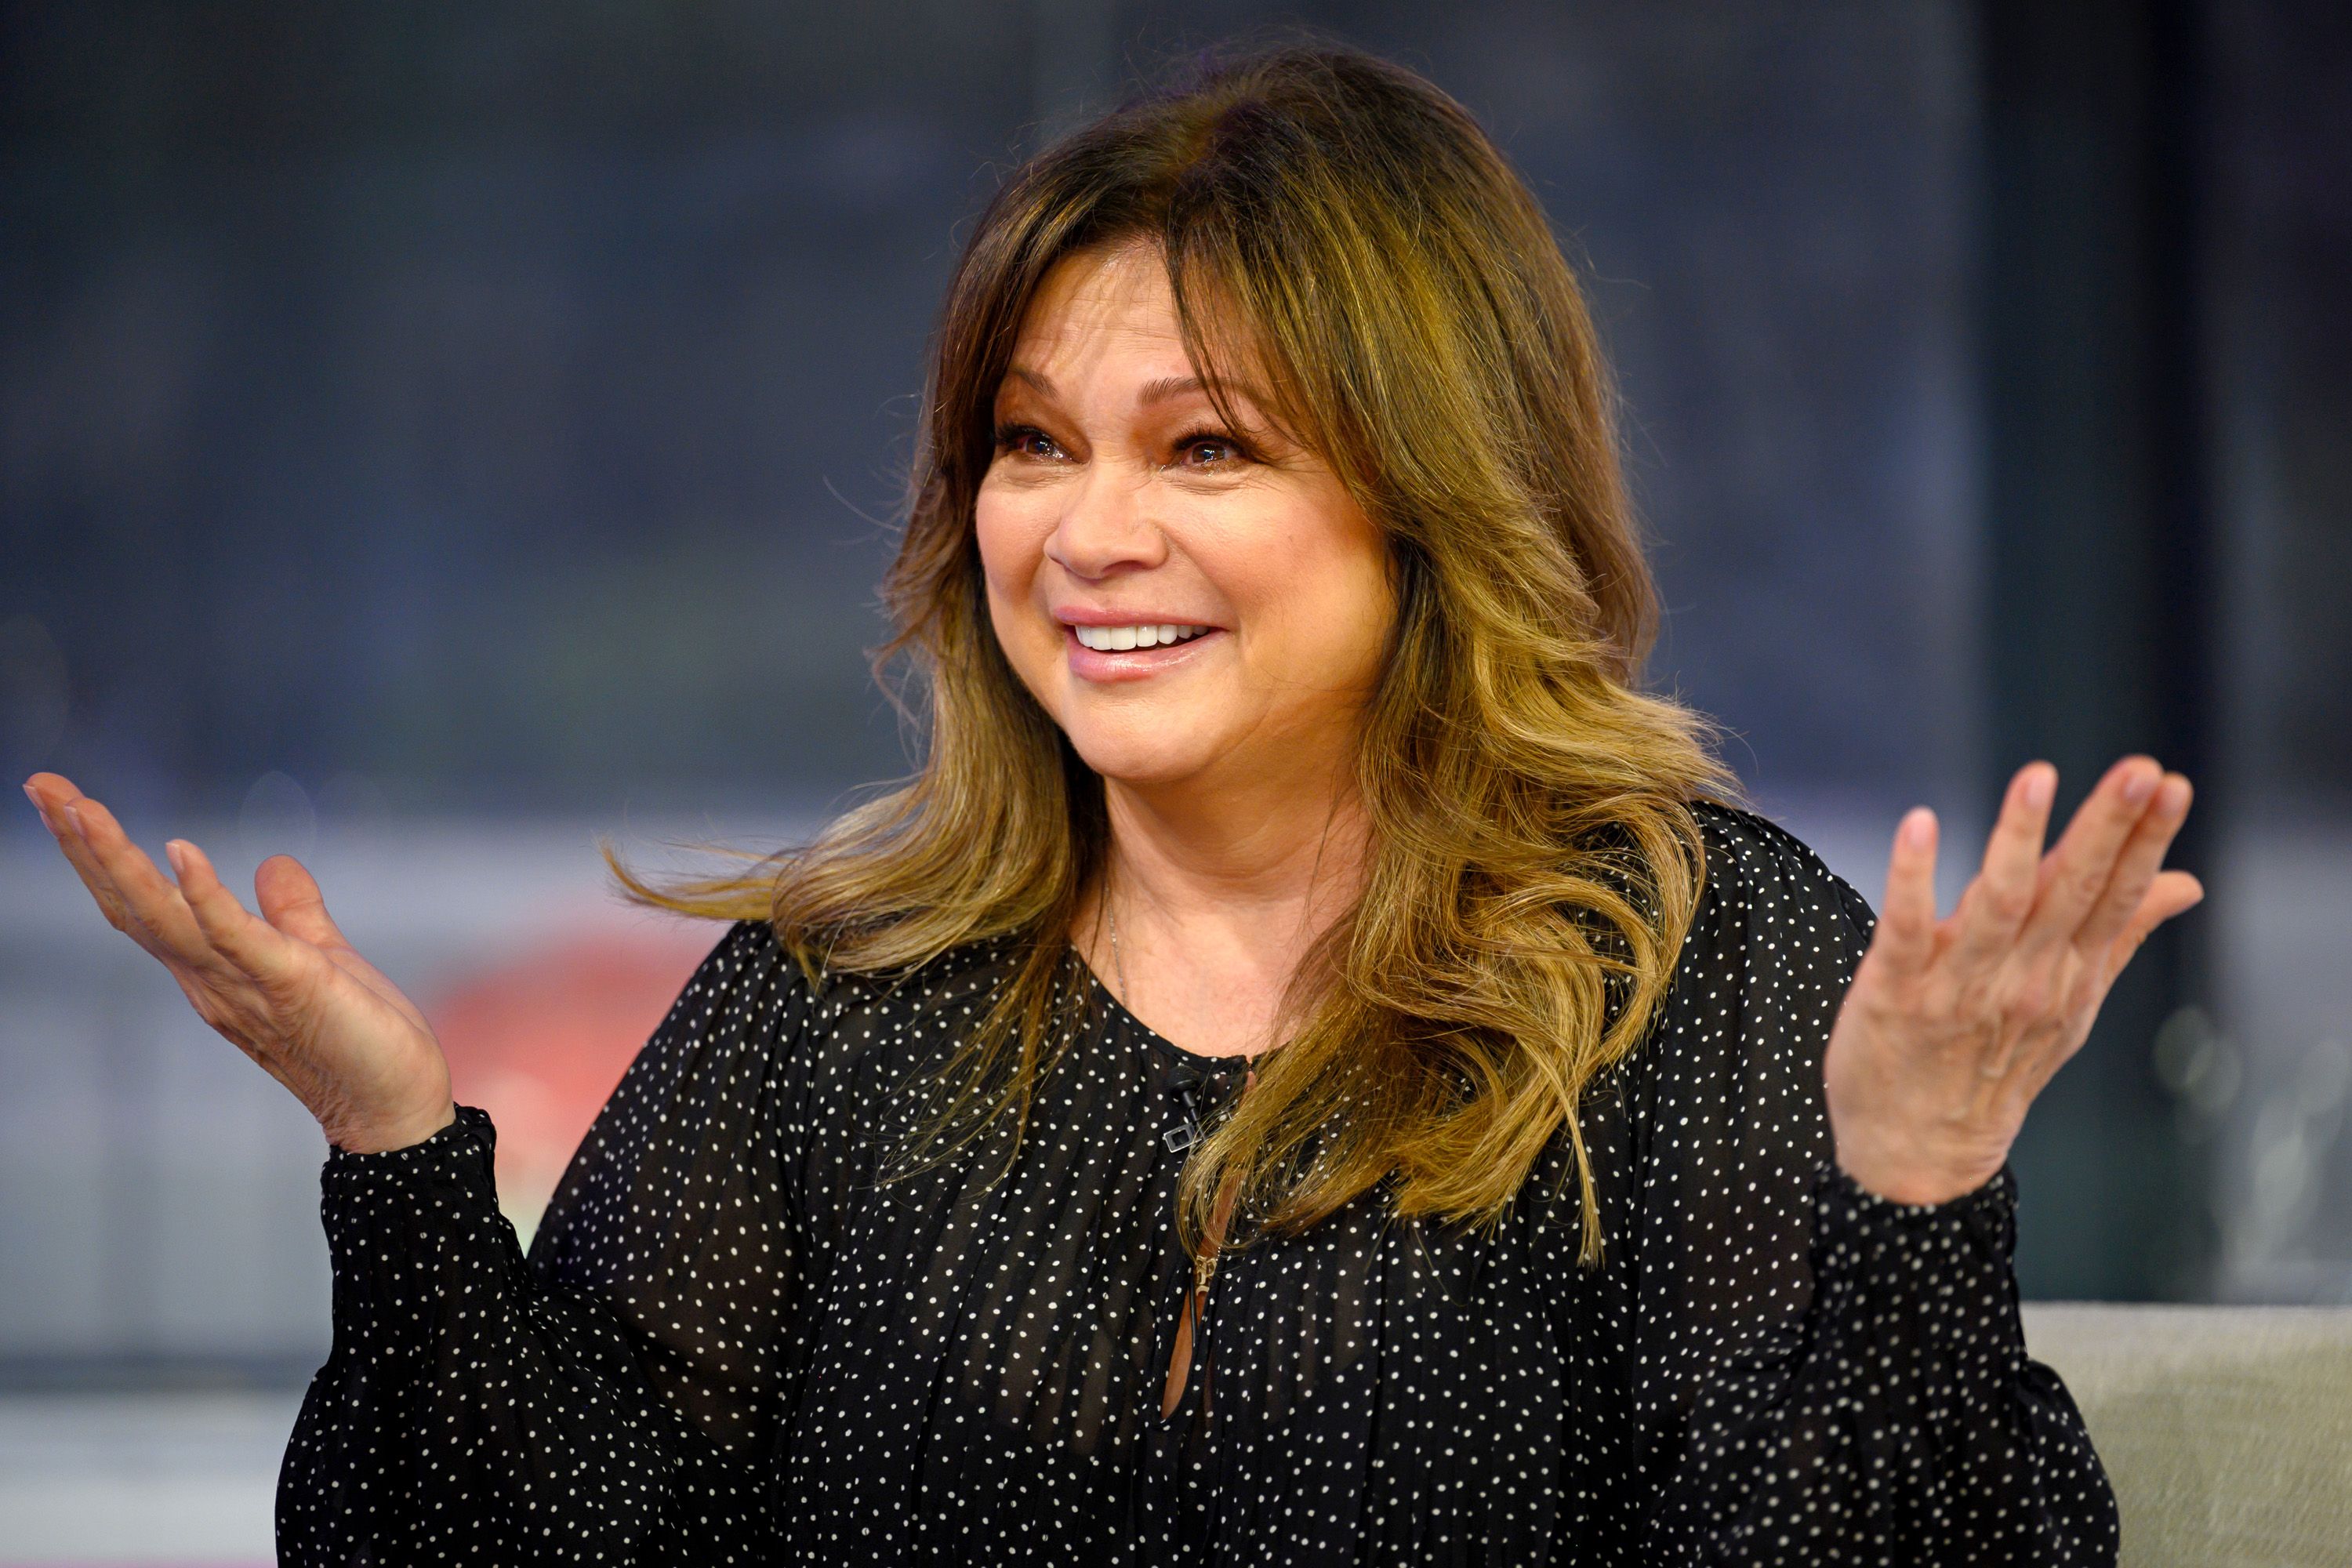 Valerie Bertinelli, 63, Gets Honest About Botox, Claps Back at Hater